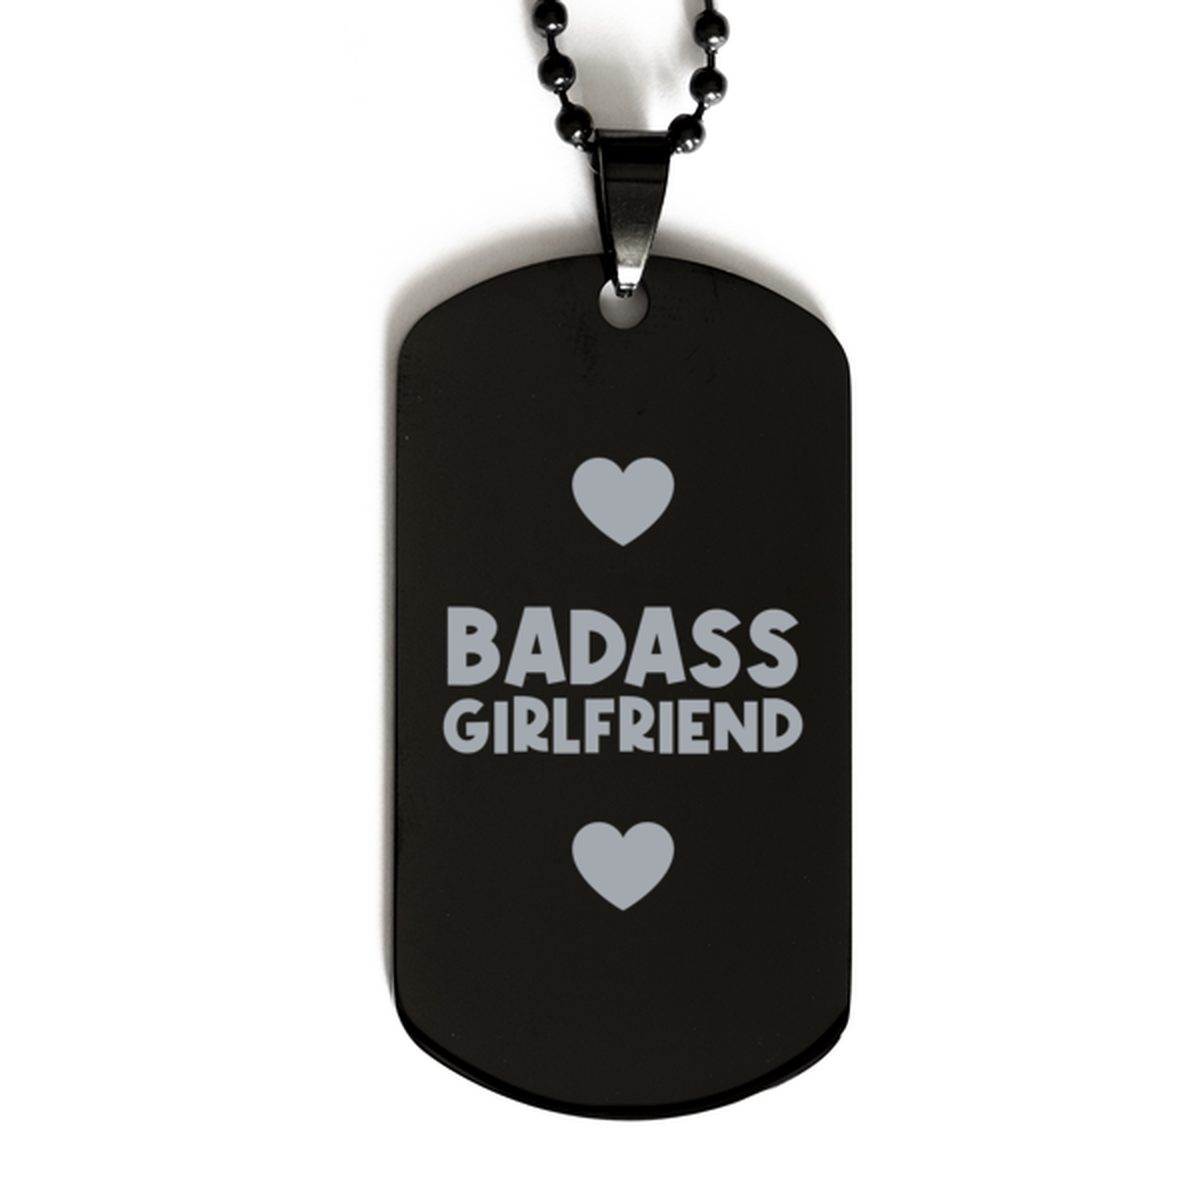 Girlfriend Black Dog Tag, Badass Girlfriend, Funny Family Gifts  Necklace For Girlfriend From Boyfriend